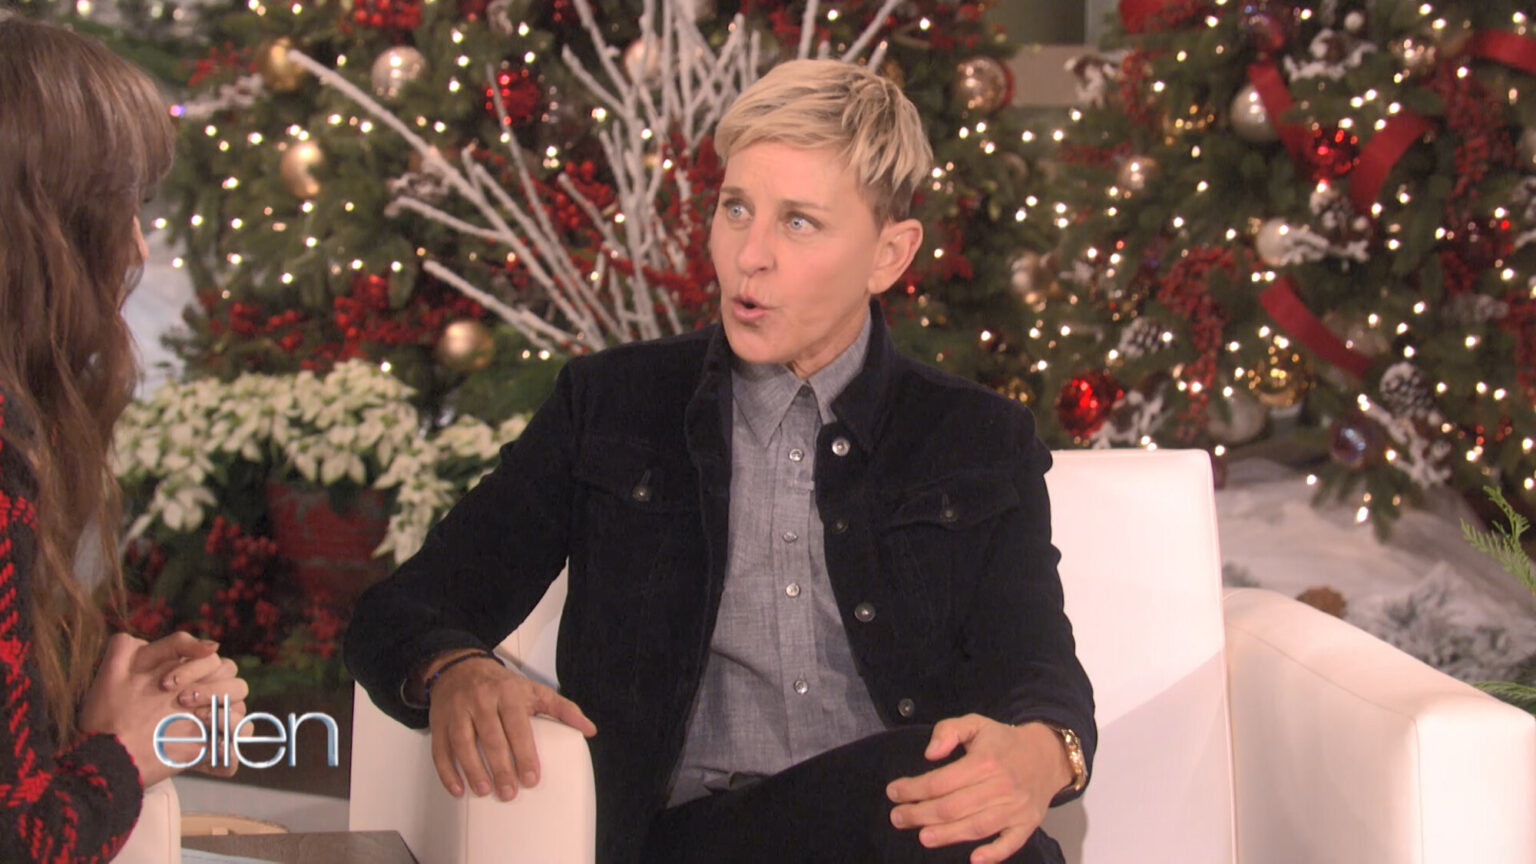 Ellen DeGeneres and her tension with a guest can lead to some awkward television. Here are some cringeworthy 'The Ellen DeGeneres Show' interviews.